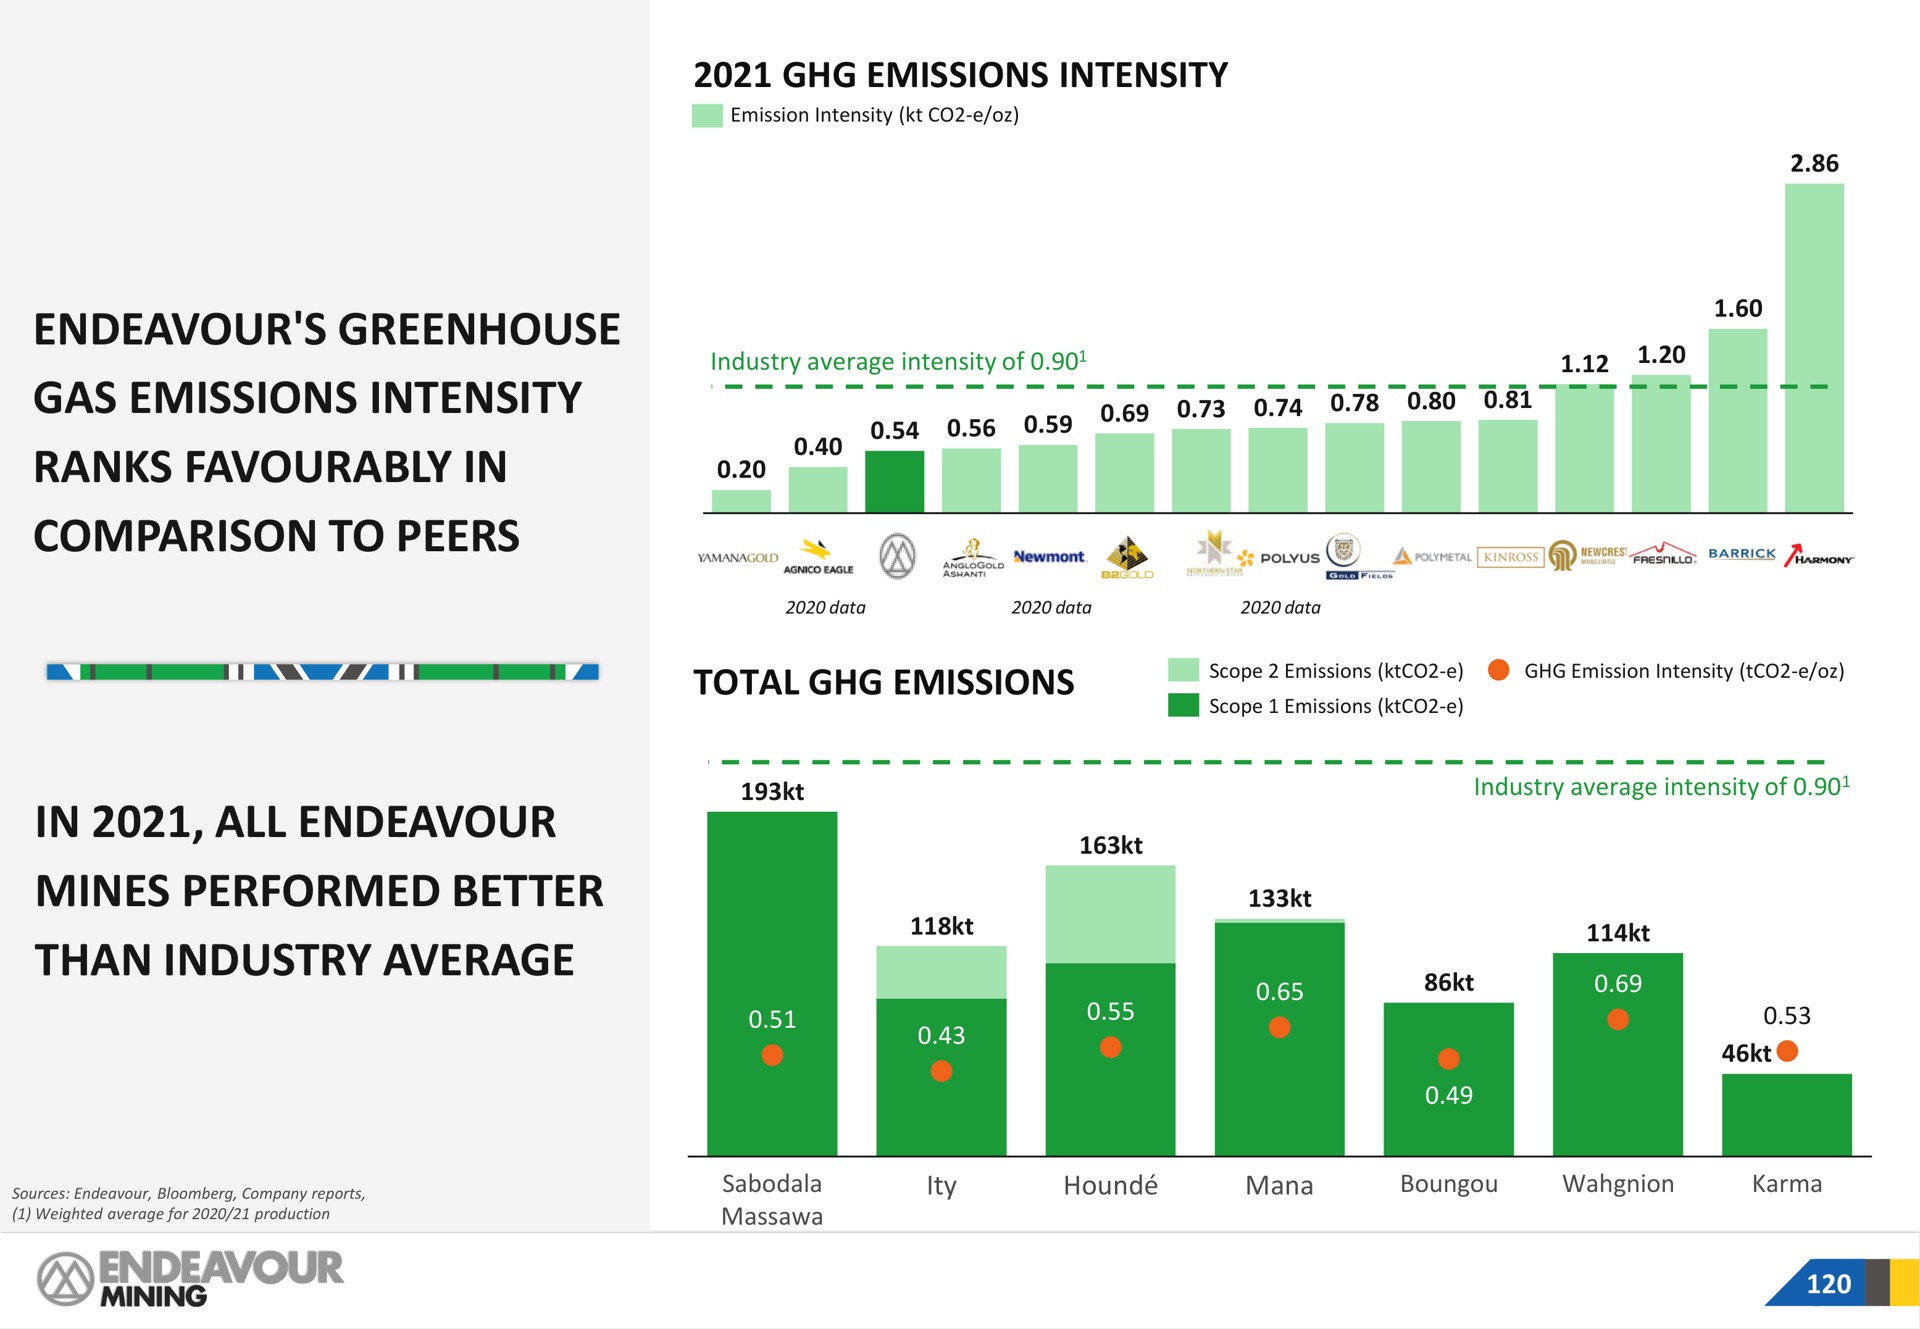 greenhouse gas emissions intensity ranks in comparison to peers in all mines performed better than industry average mining | Endeavour Mining